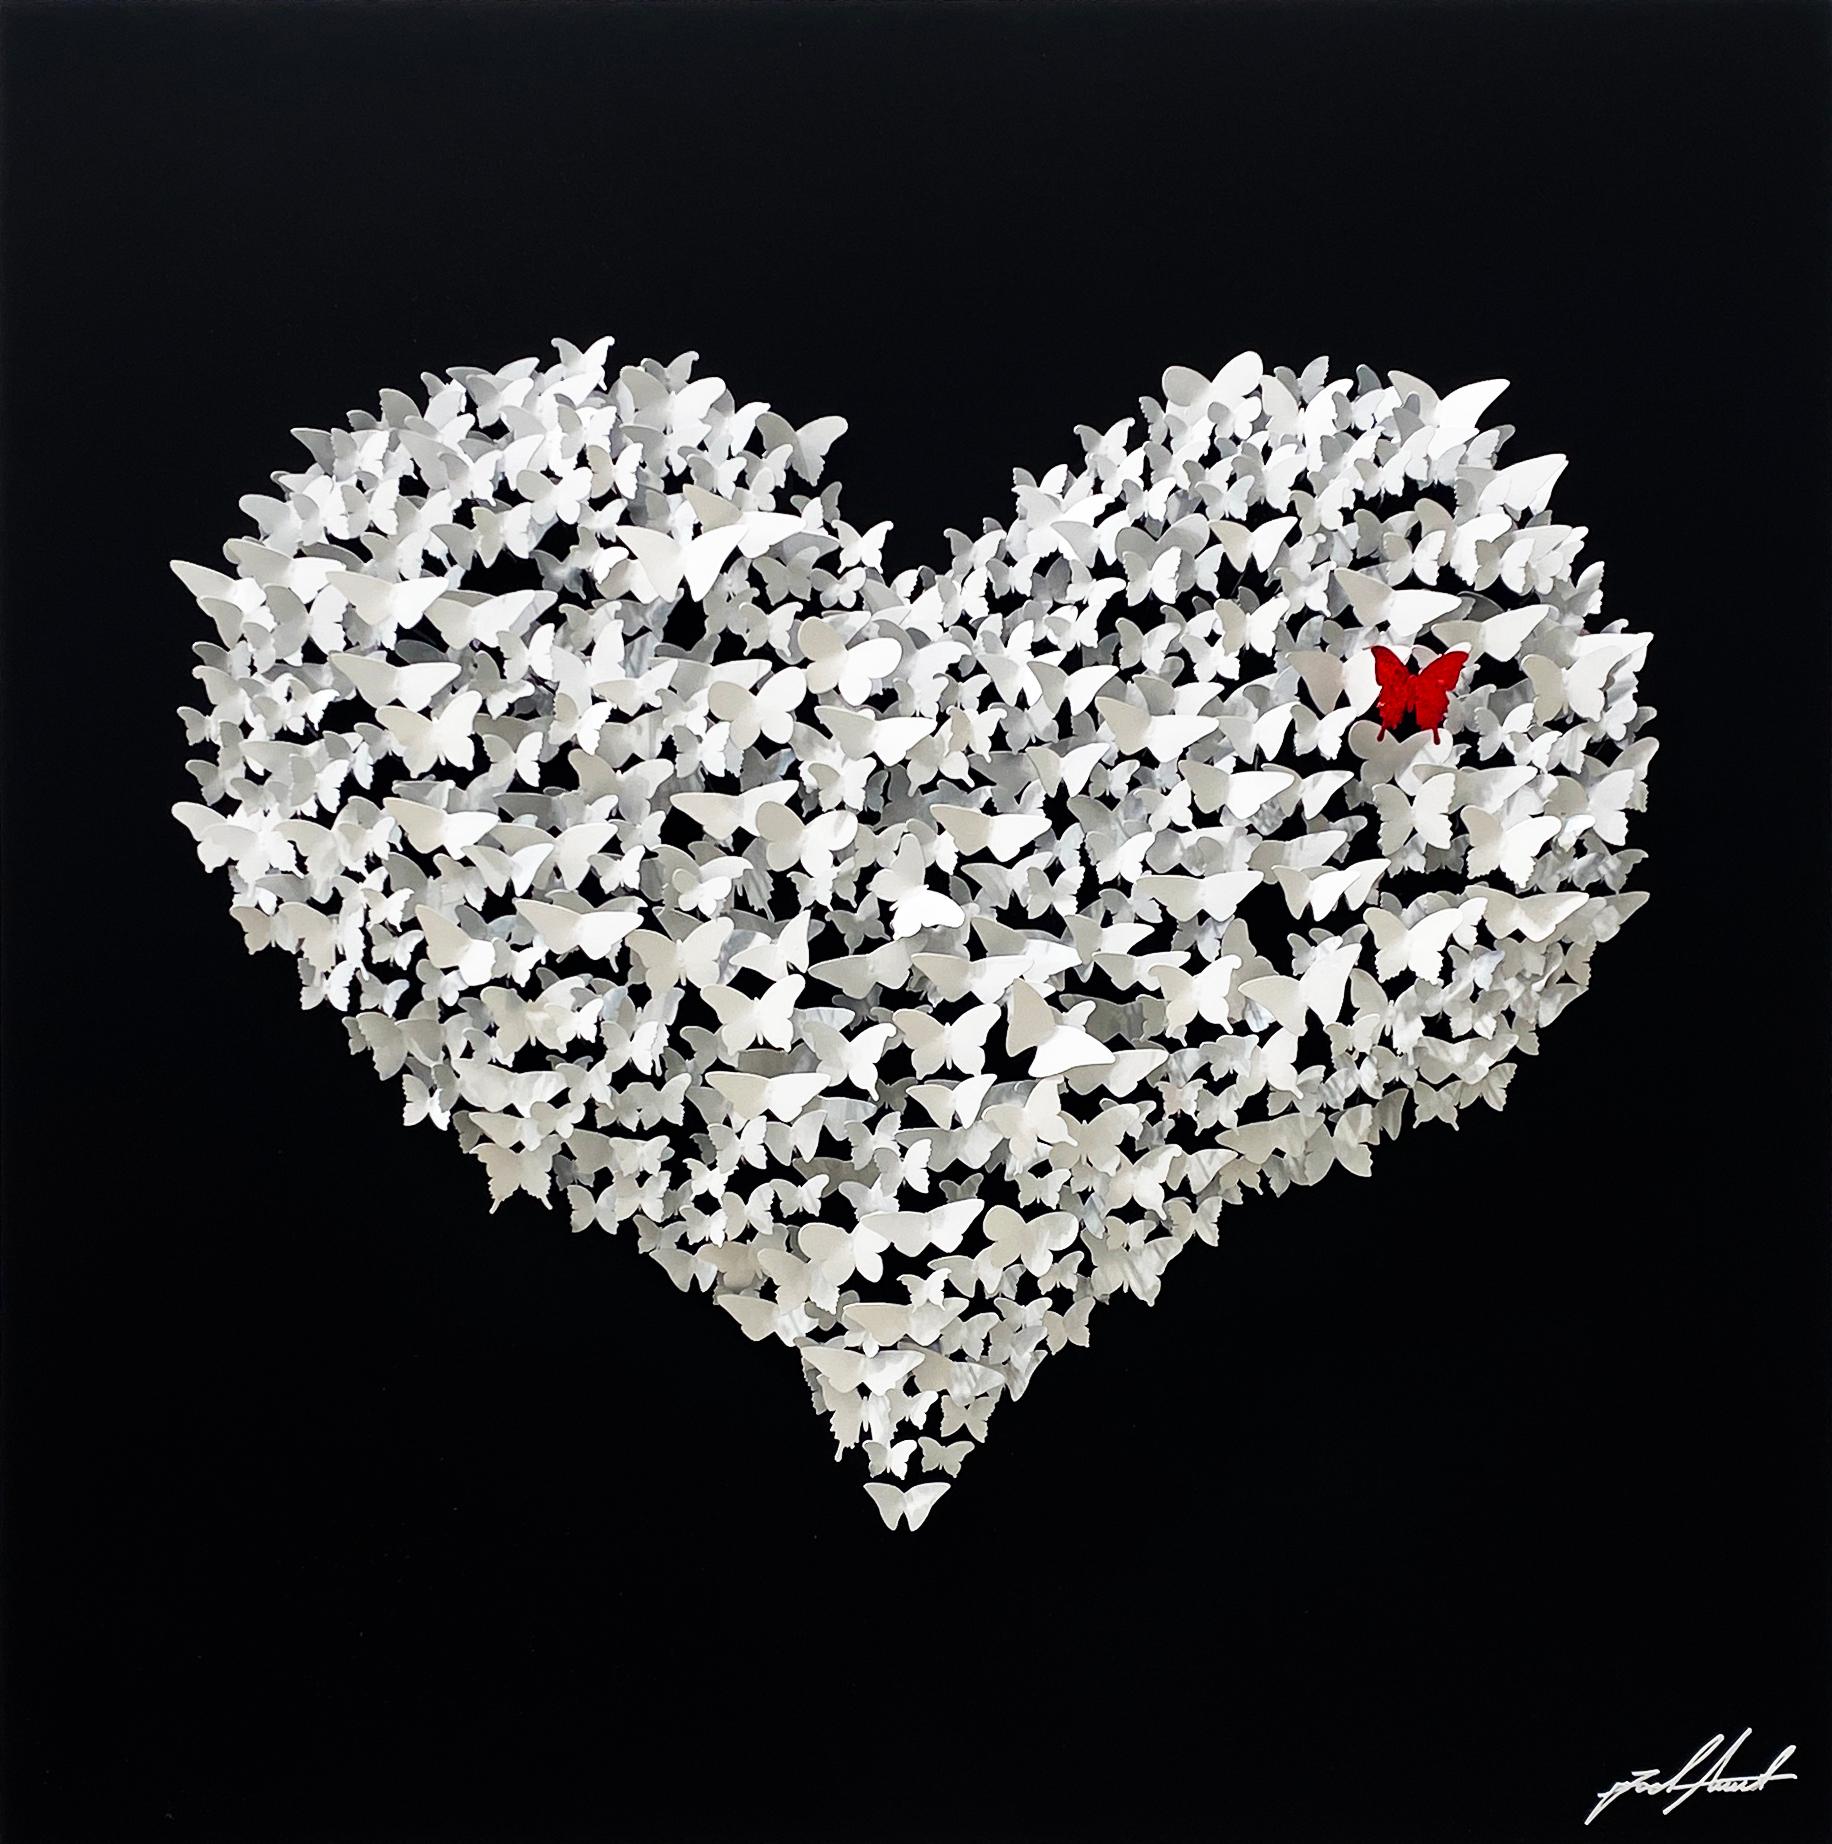 Flying Love - Black with White Butterflies, Mixed Media Metal Wall Sculpture - Mixed Media Art by Joel Amit